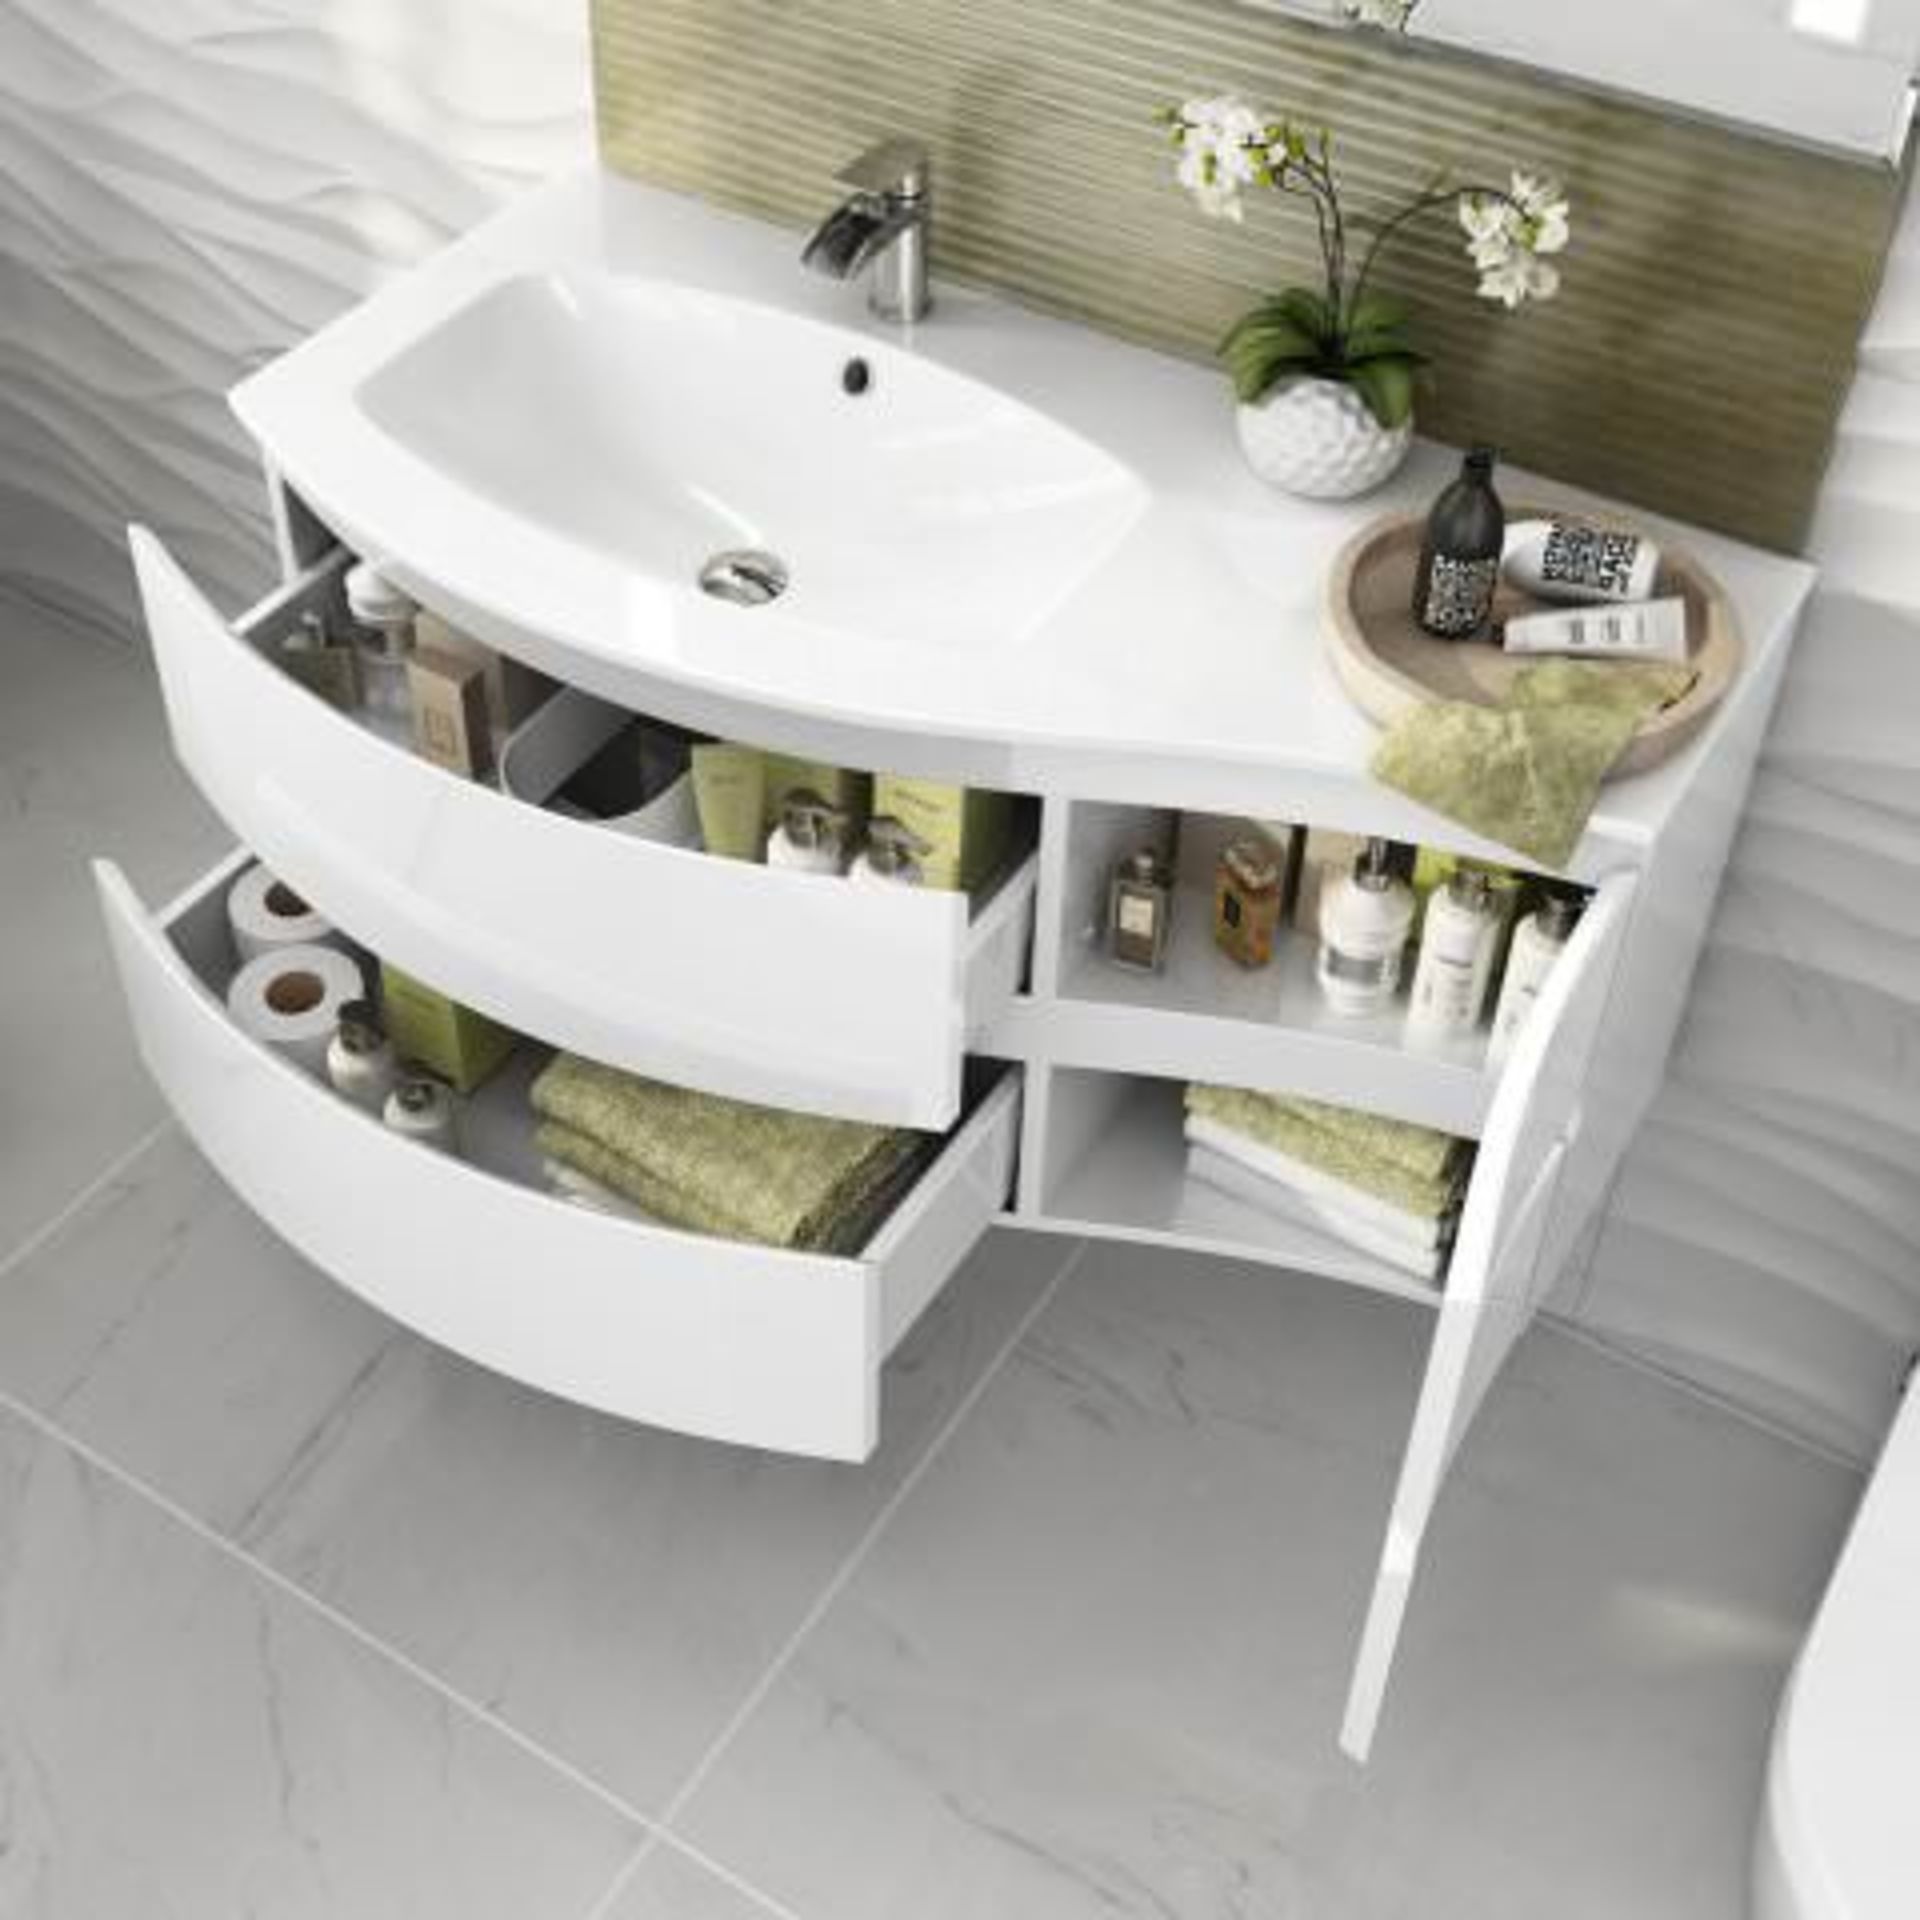 (W318) 1040mm Amelie High Gloss White Curved Vanity Unit - Left Hand - Wall Hung. RRP £1,249. - Image 2 of 4